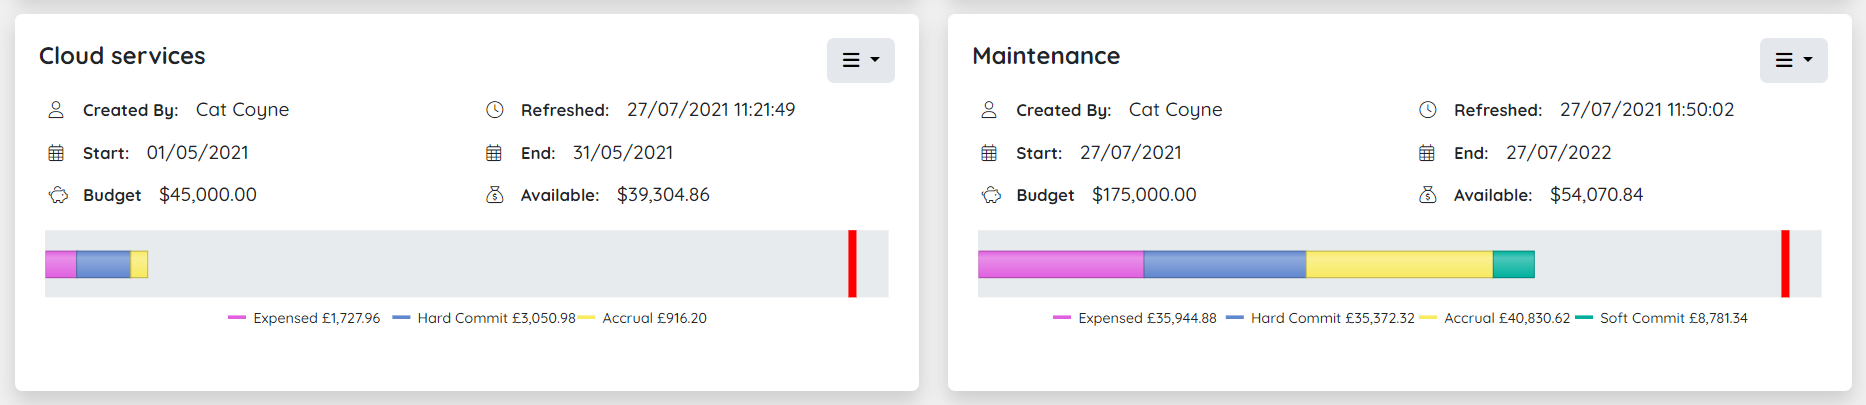 Budgets.png